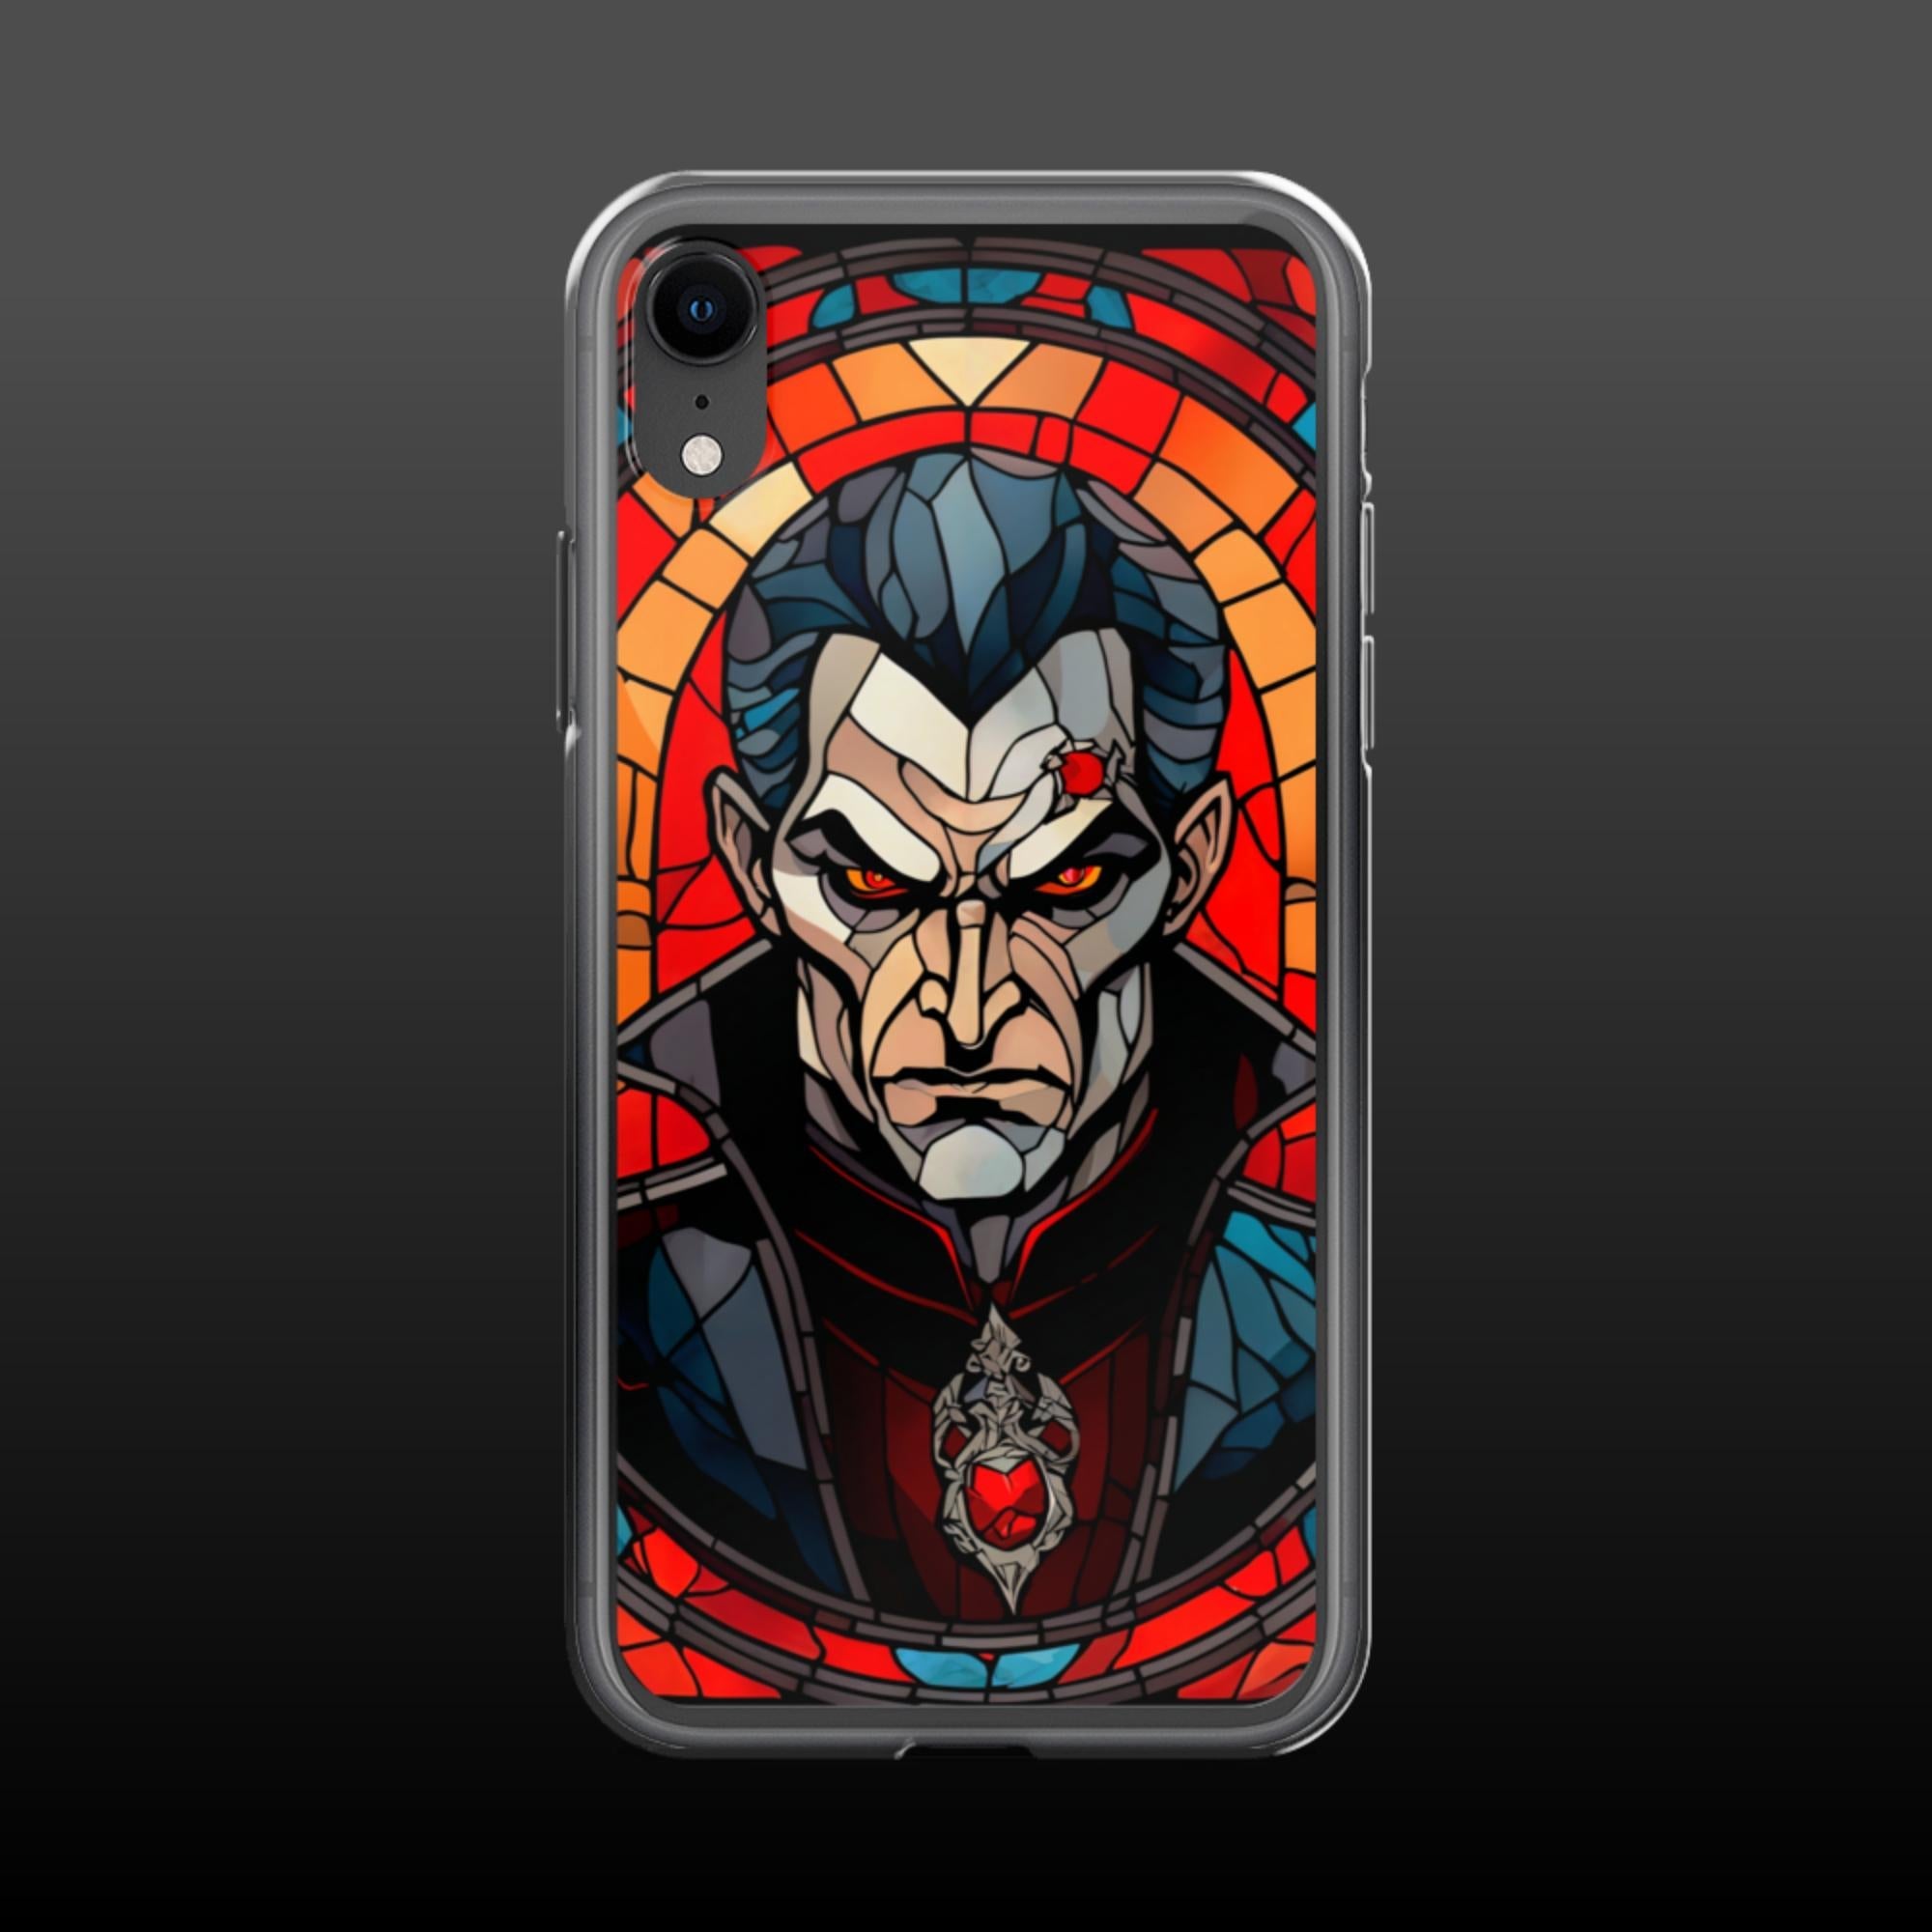 "Headshots always work" clear iphone case - Clear iphone case - Ever colorful